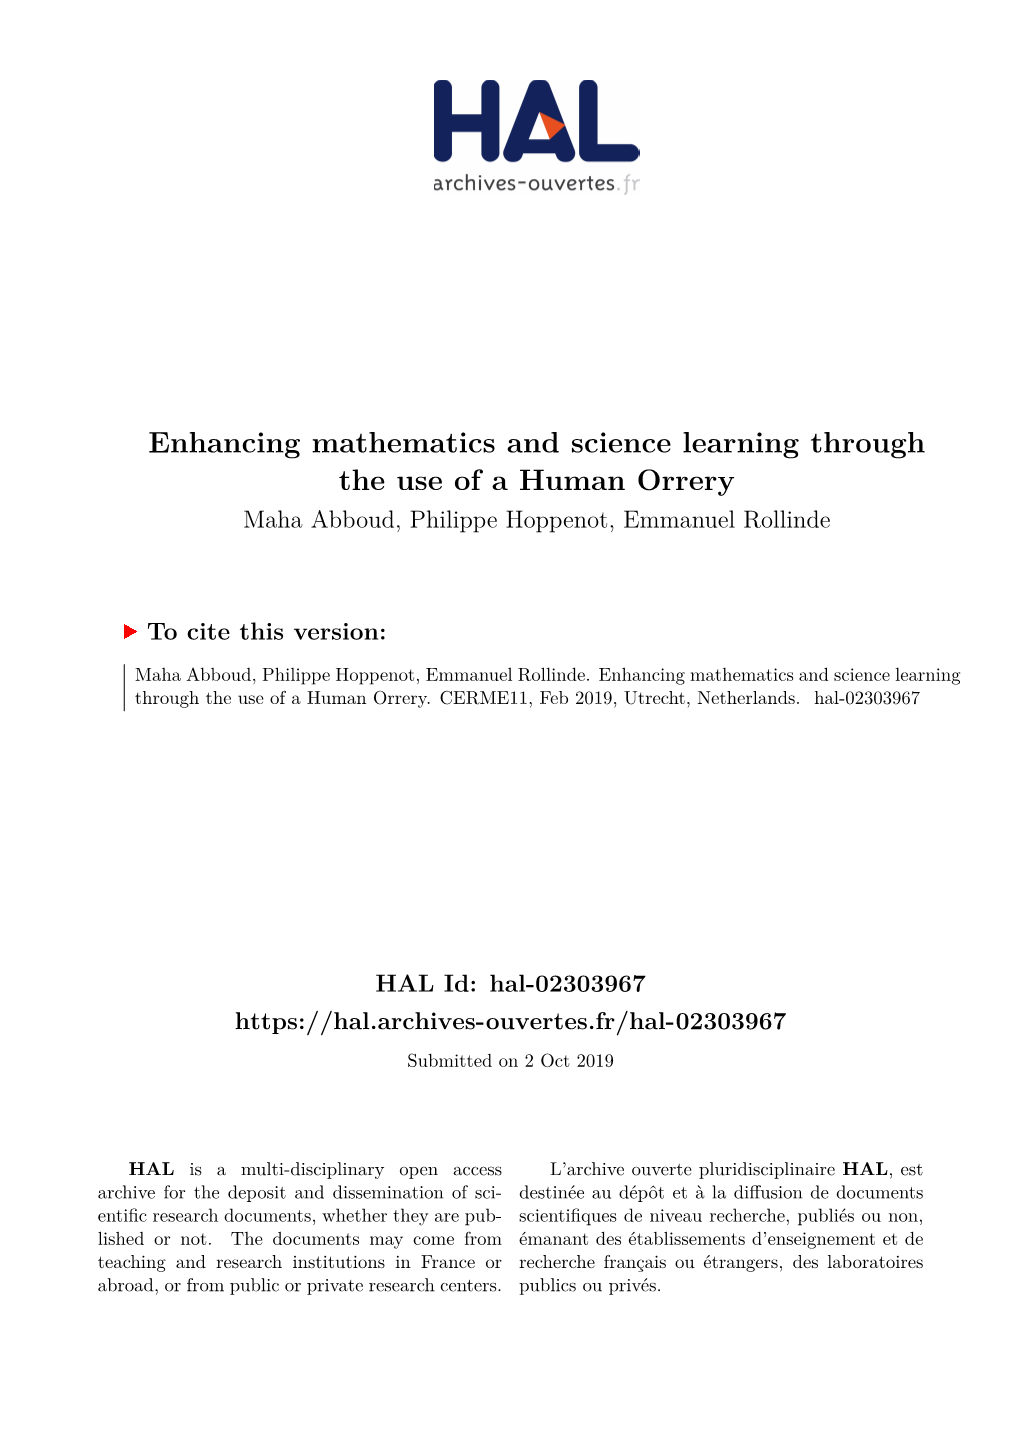 Enhancing Mathematics and Science Learning Through the Use of a Human Orrery Maha Abboud, Philippe Hoppenot, Emmanuel Rollinde